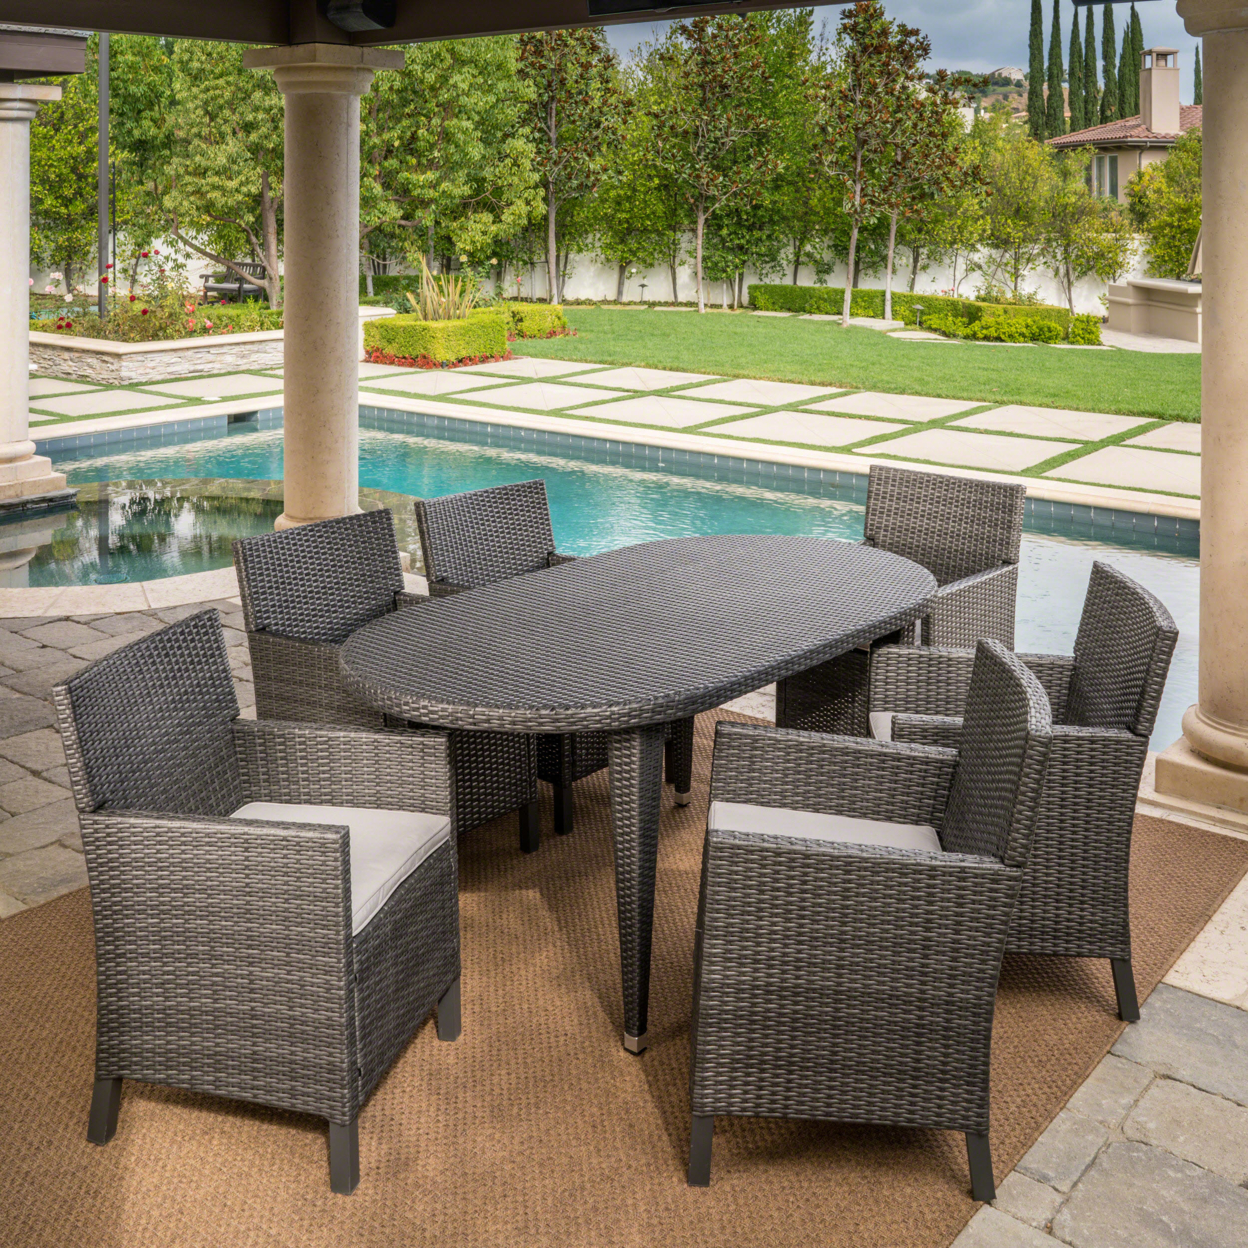 Crete Outdoor 7 Piece Wicker Oval Dining Set With Water Resistant Cushions - Multi-brown